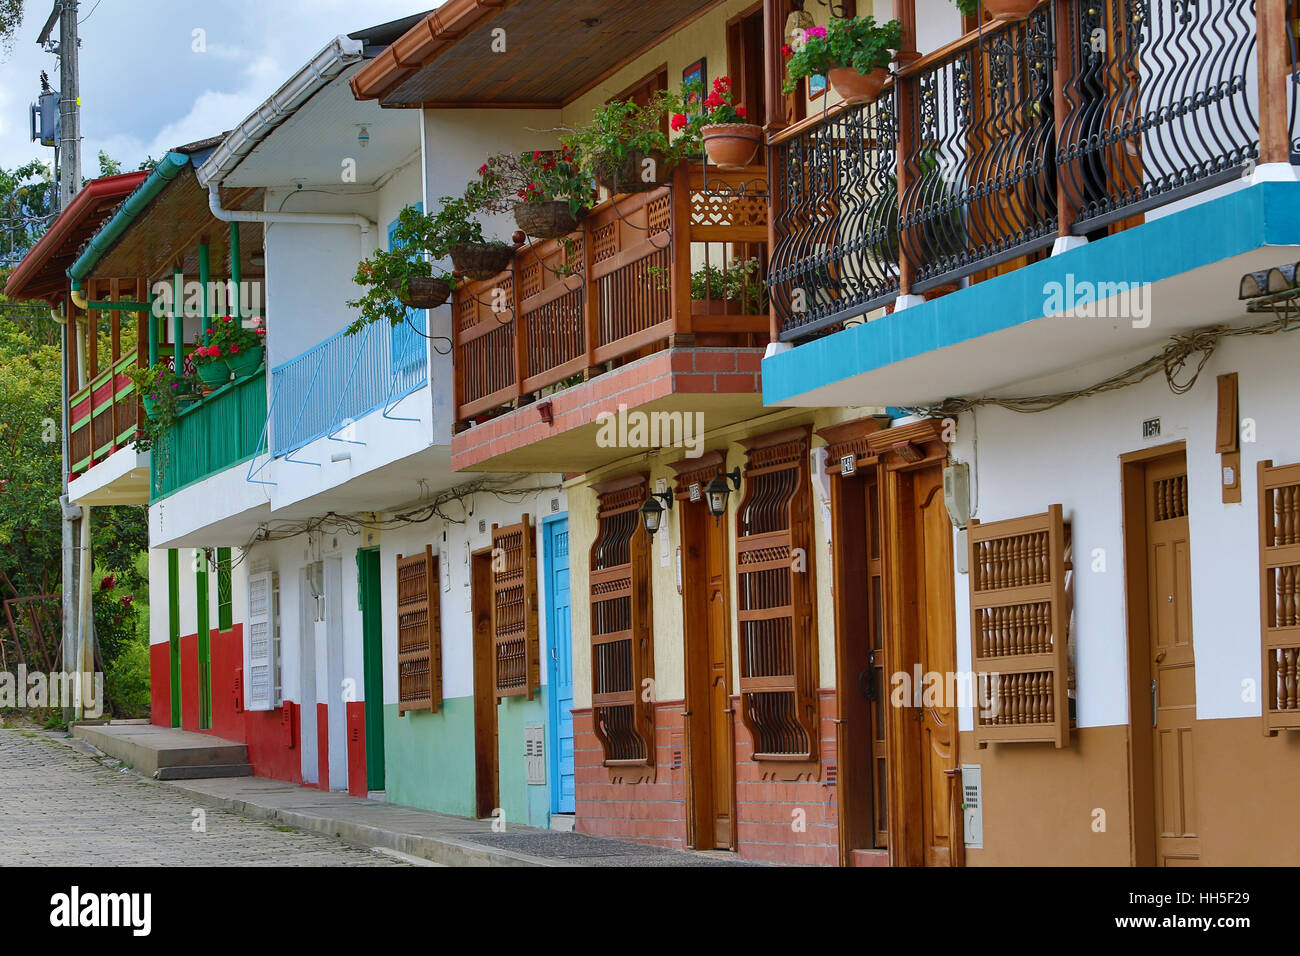 typical architecture in the colonial town of El Jardin Colombia Stock Photo